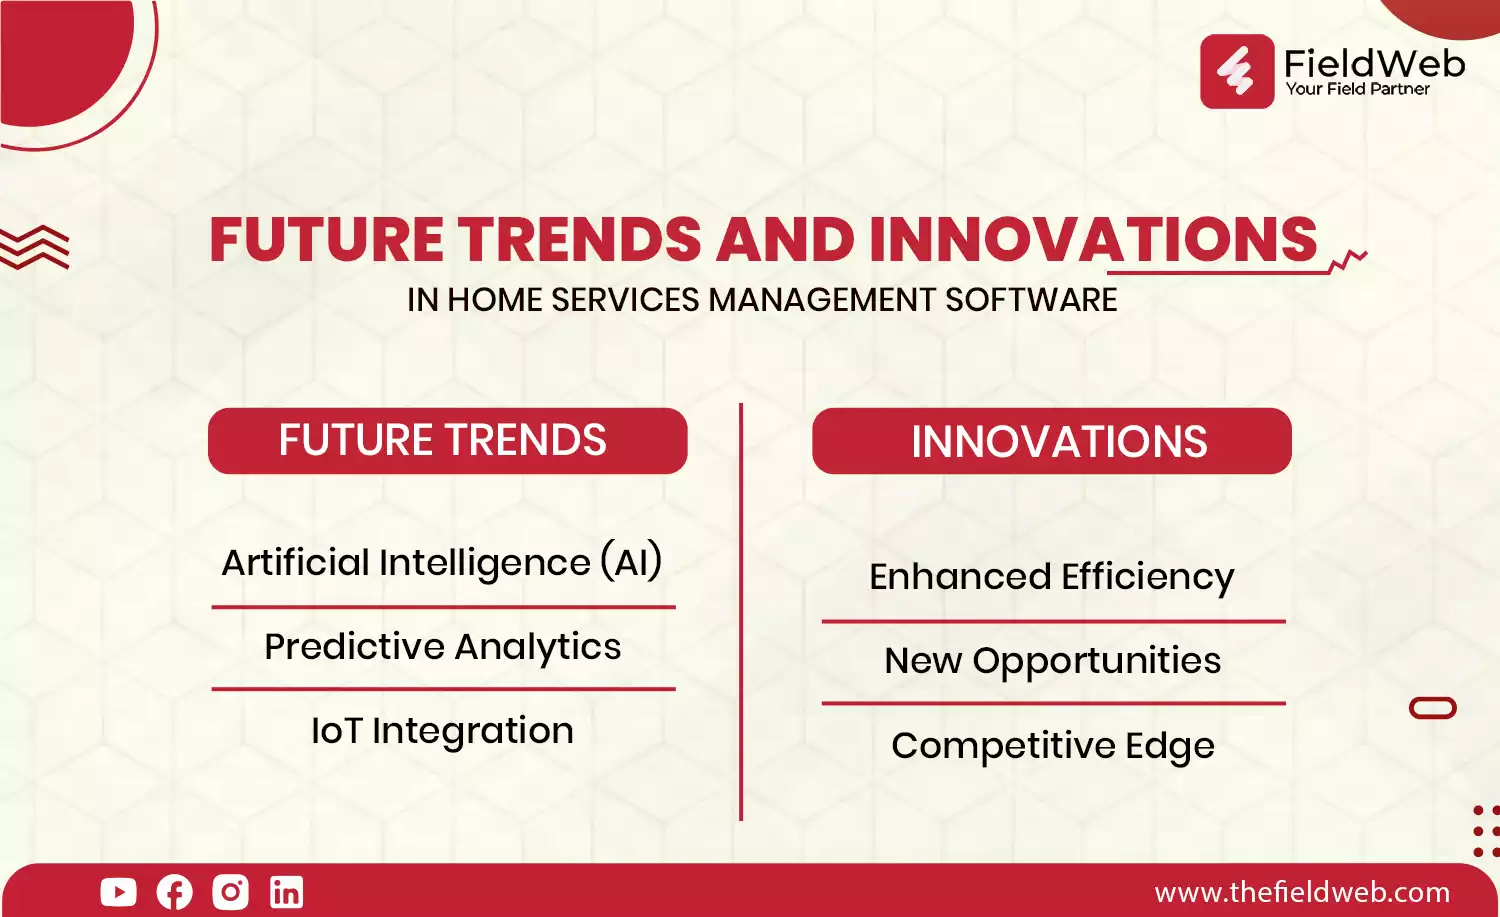 image is displaying future trends and innovation